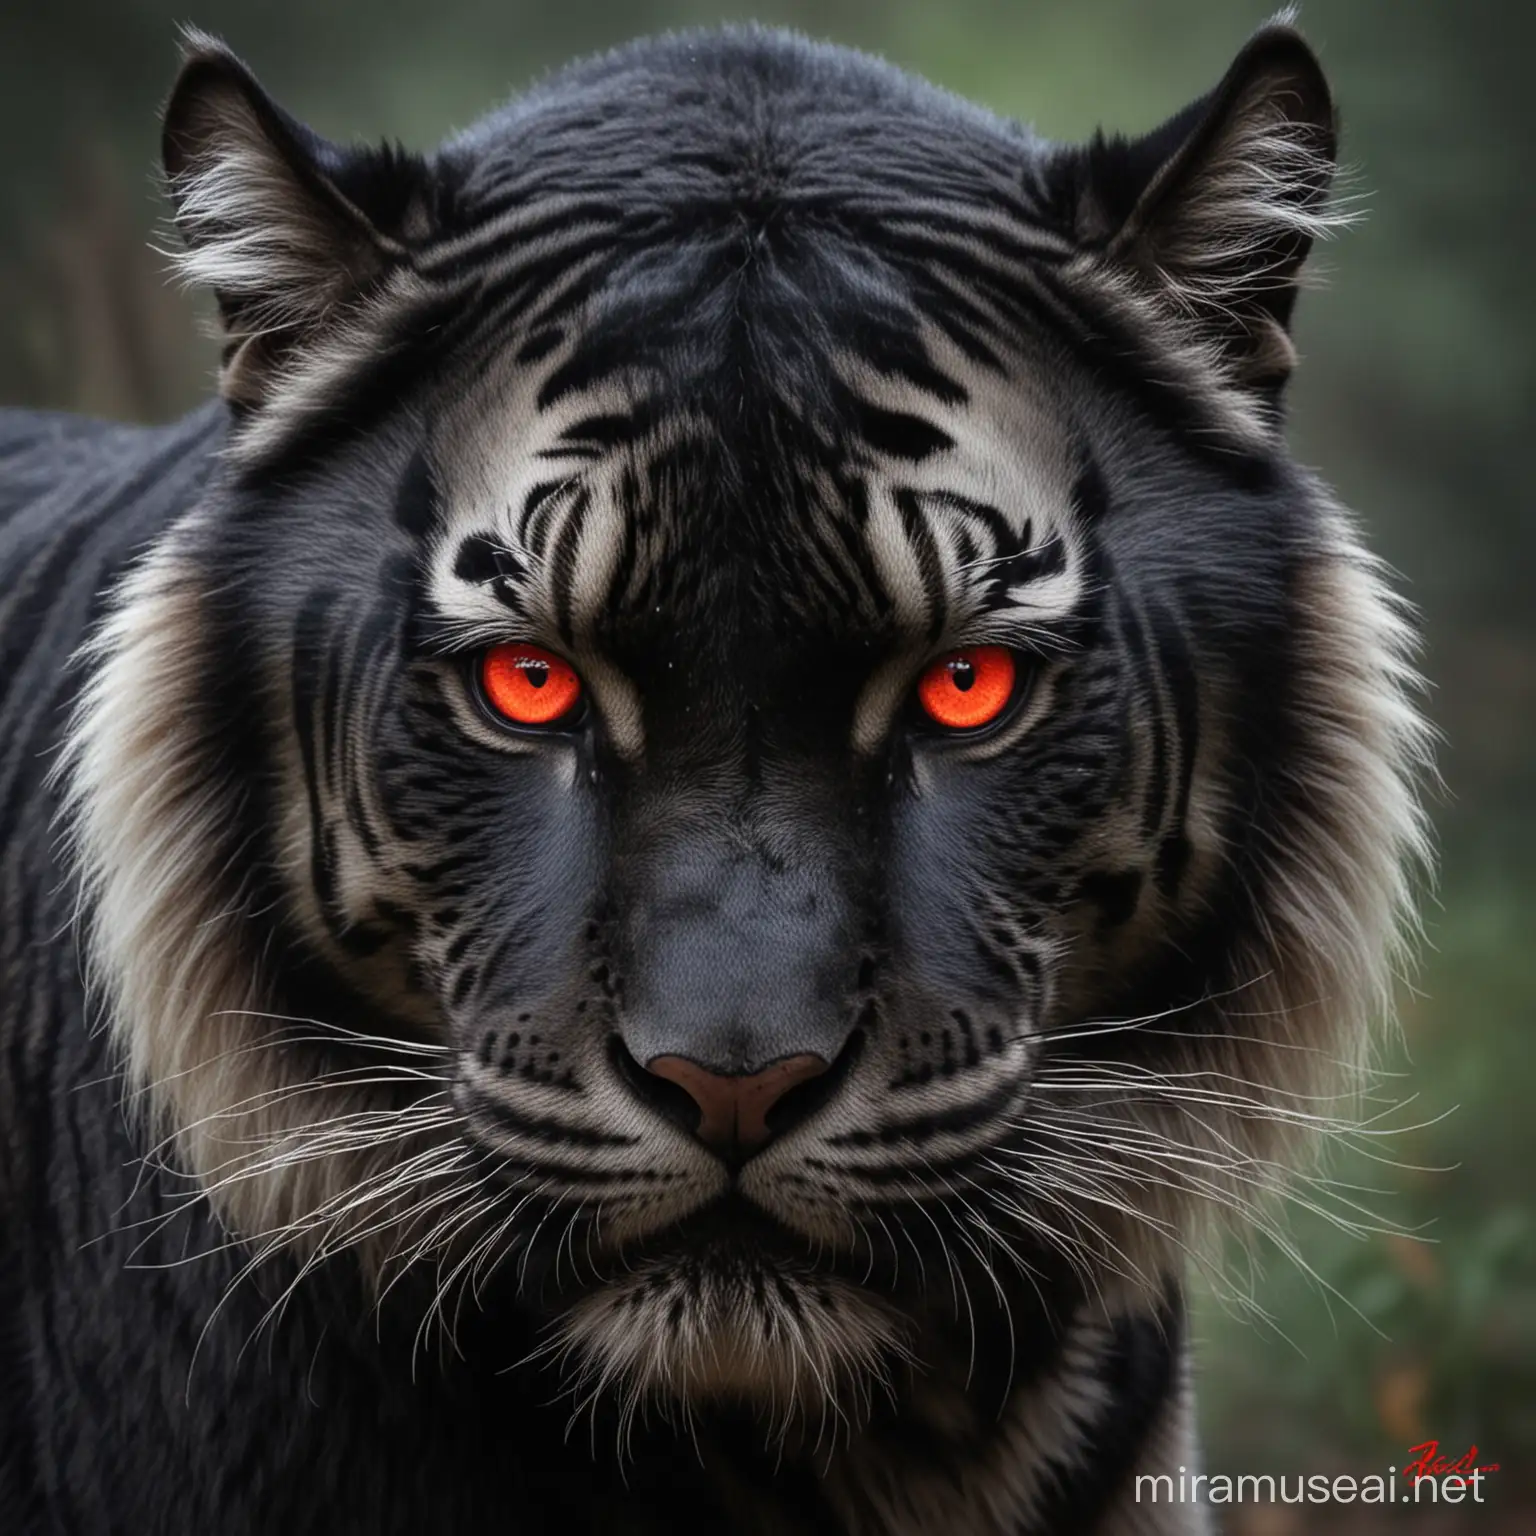 Majestic Black Tiger with Intense Red Eyes